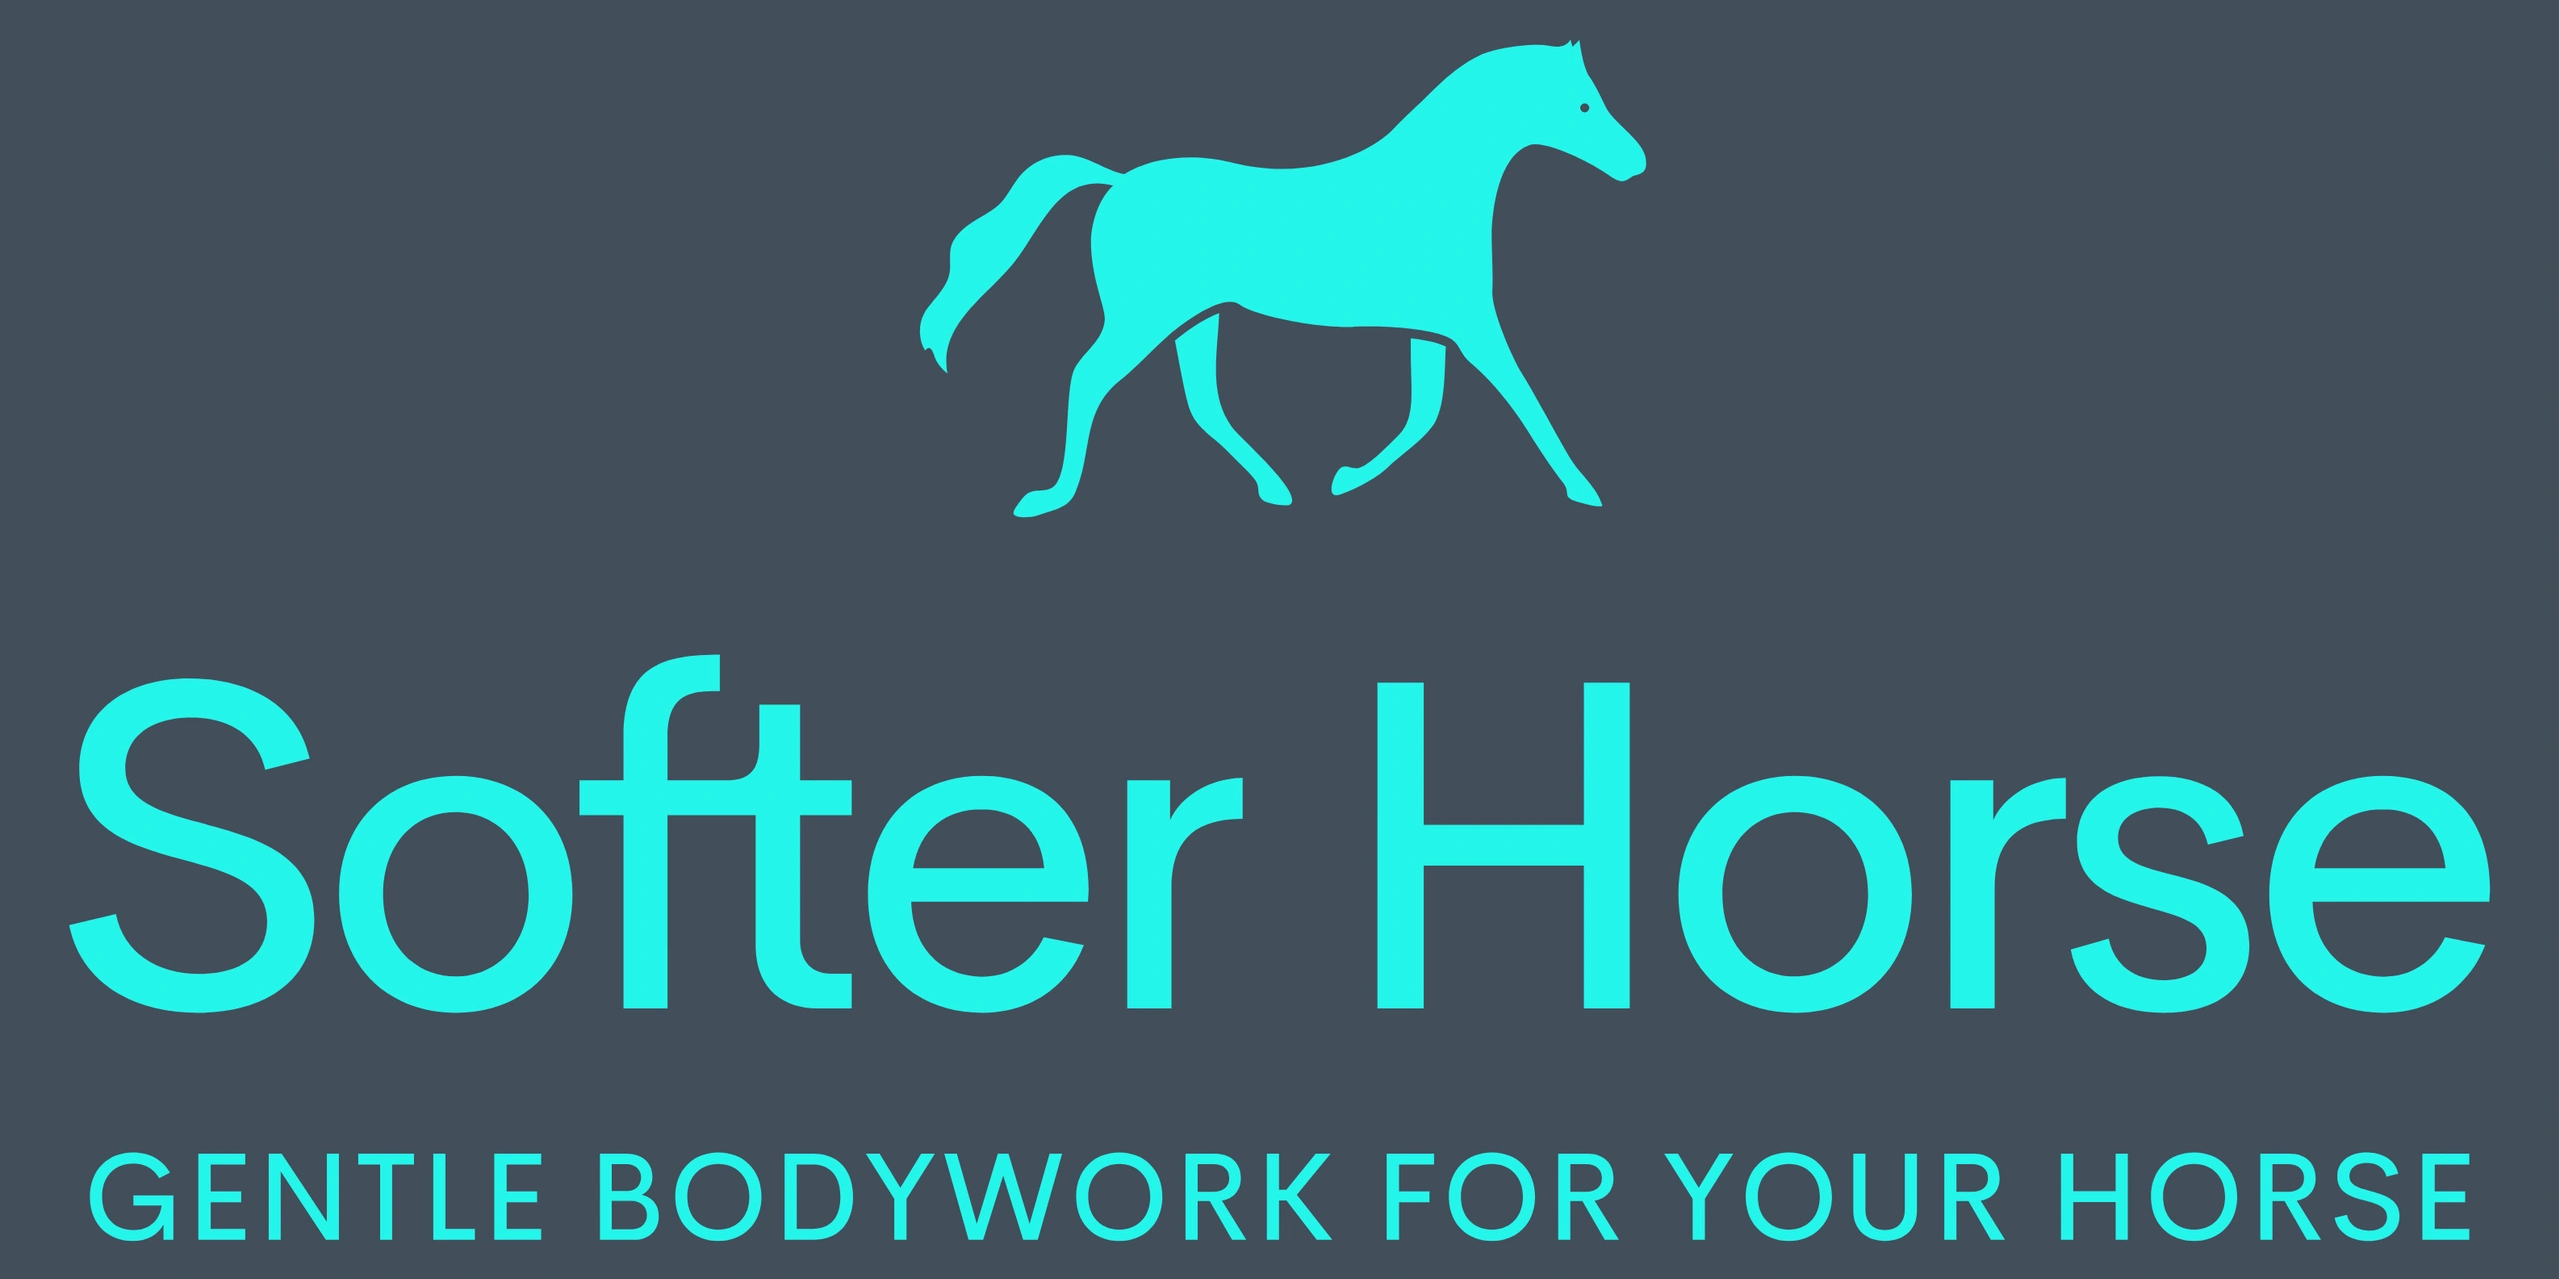 Softer Horse
gentle bodywork for your horse